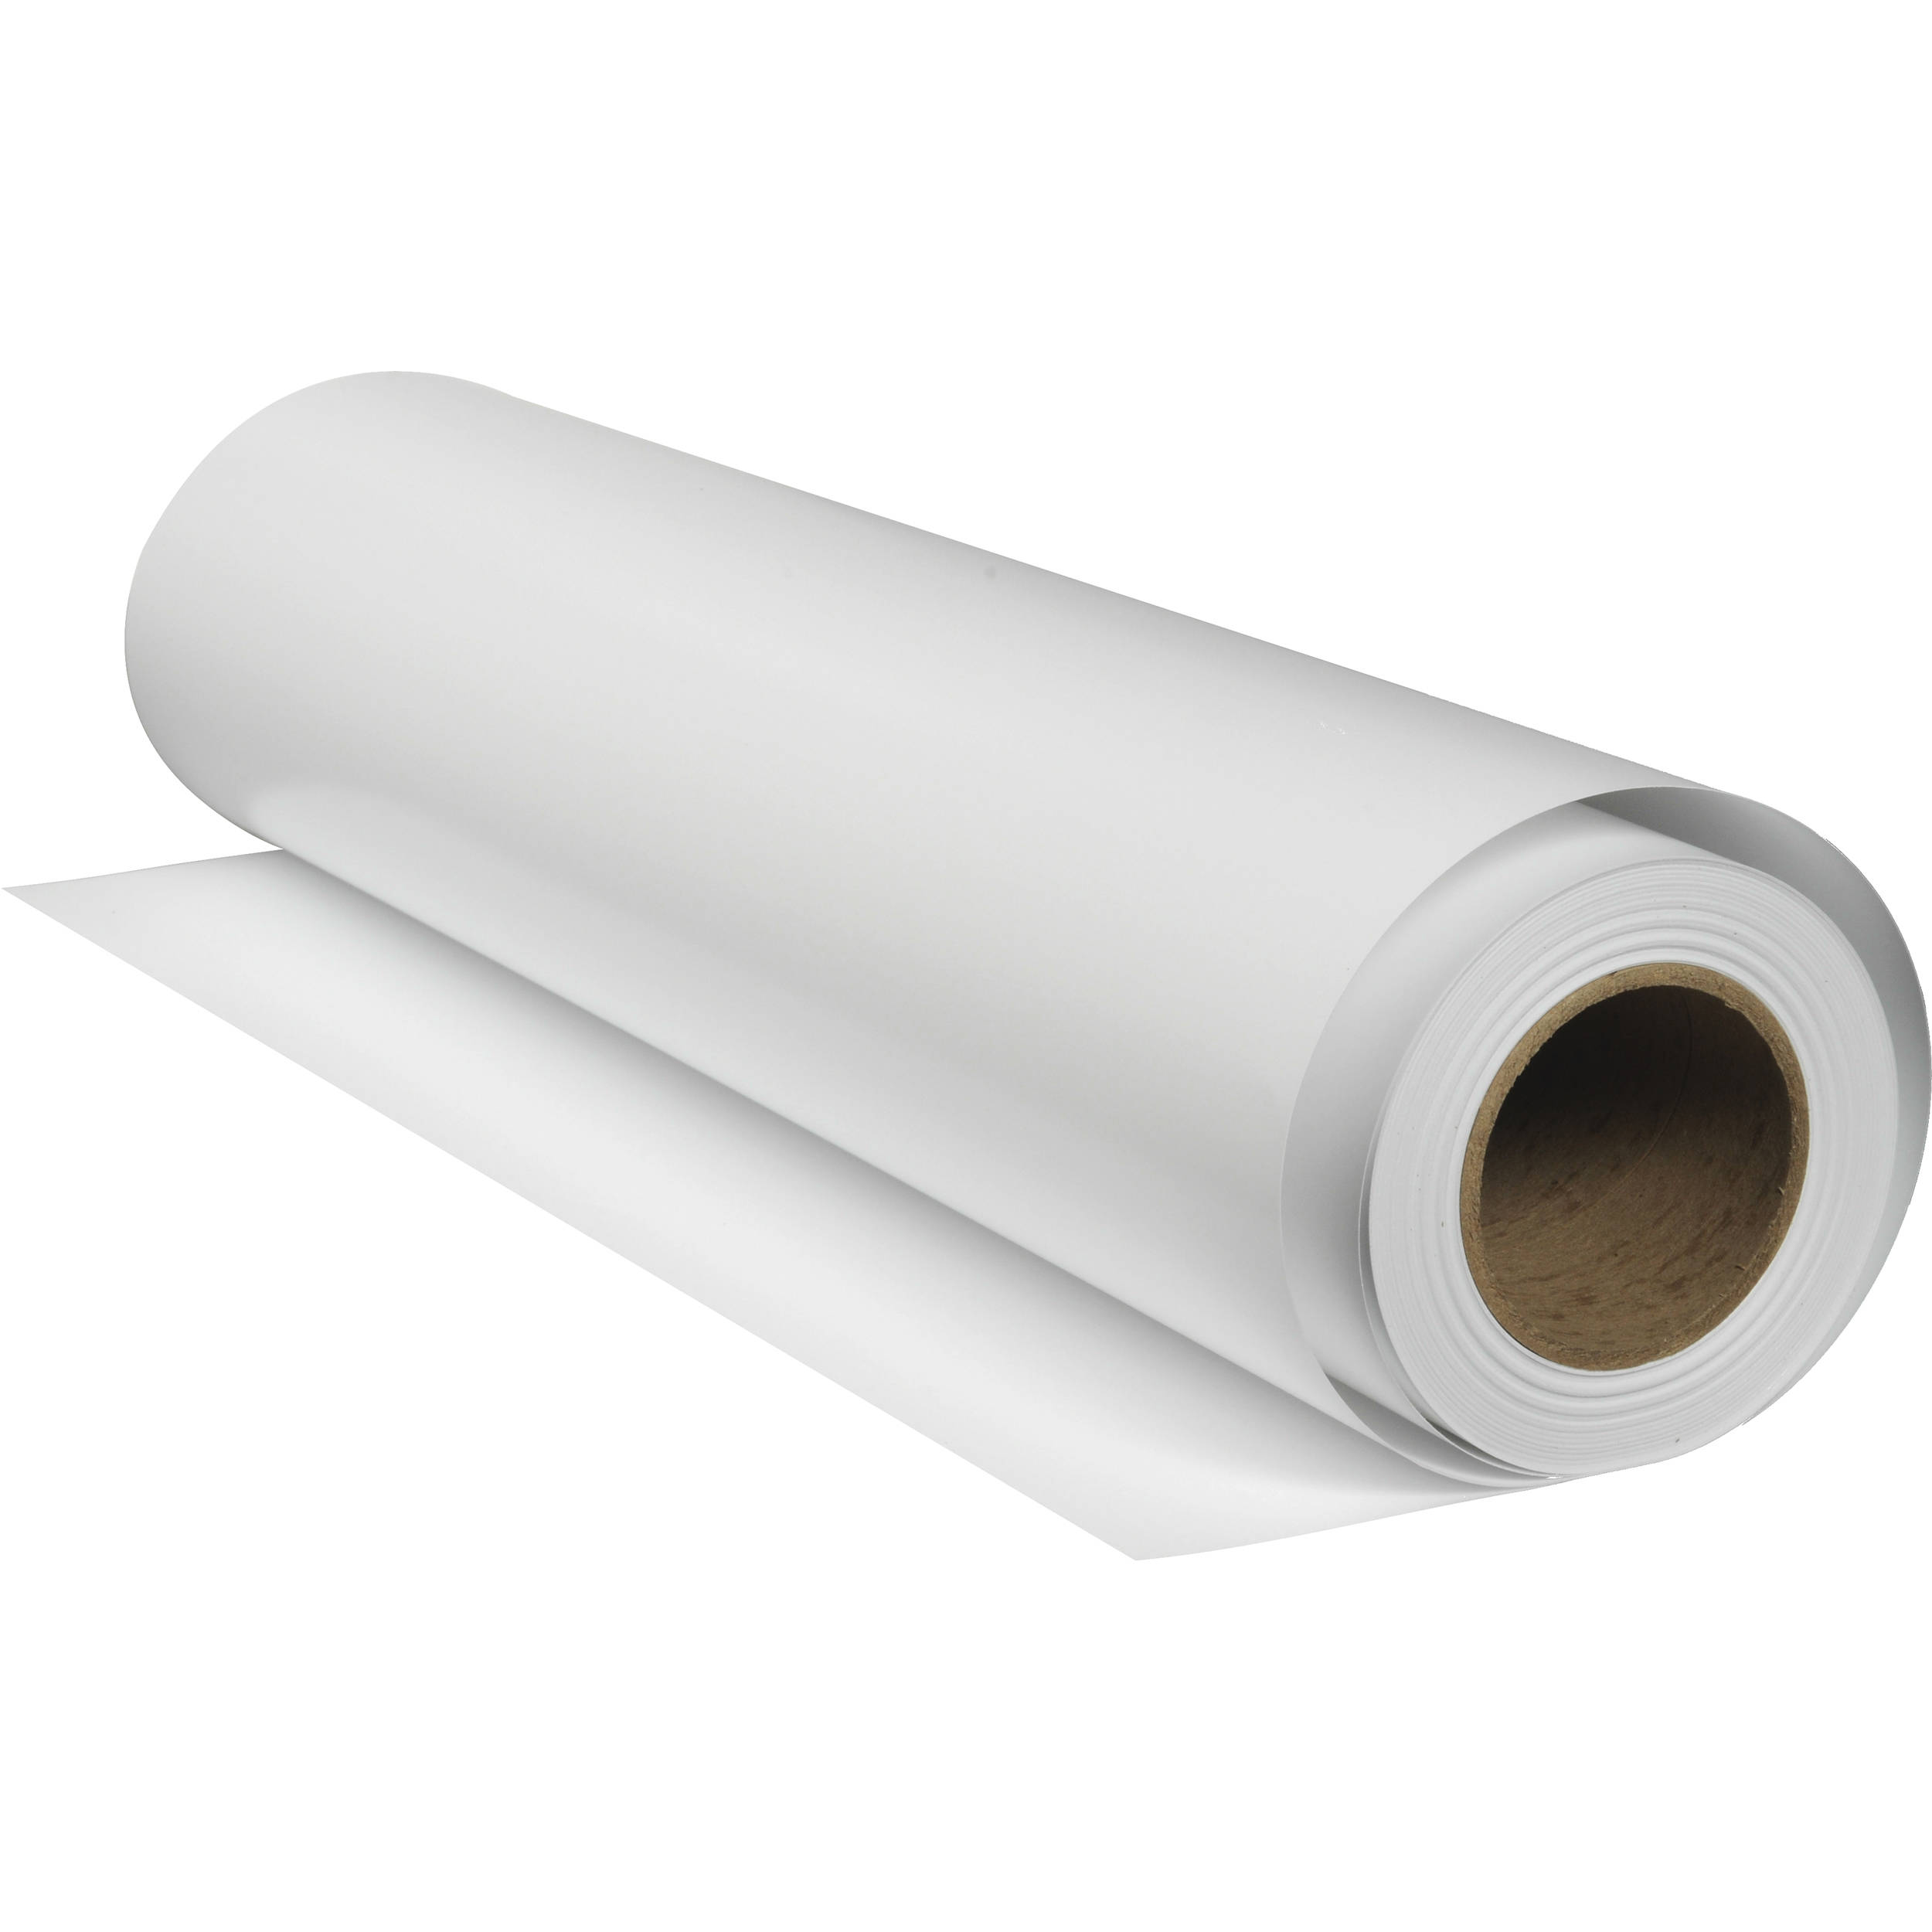 Premier Imaging Photo Gloss Production Paper (44" x 100' Roll)